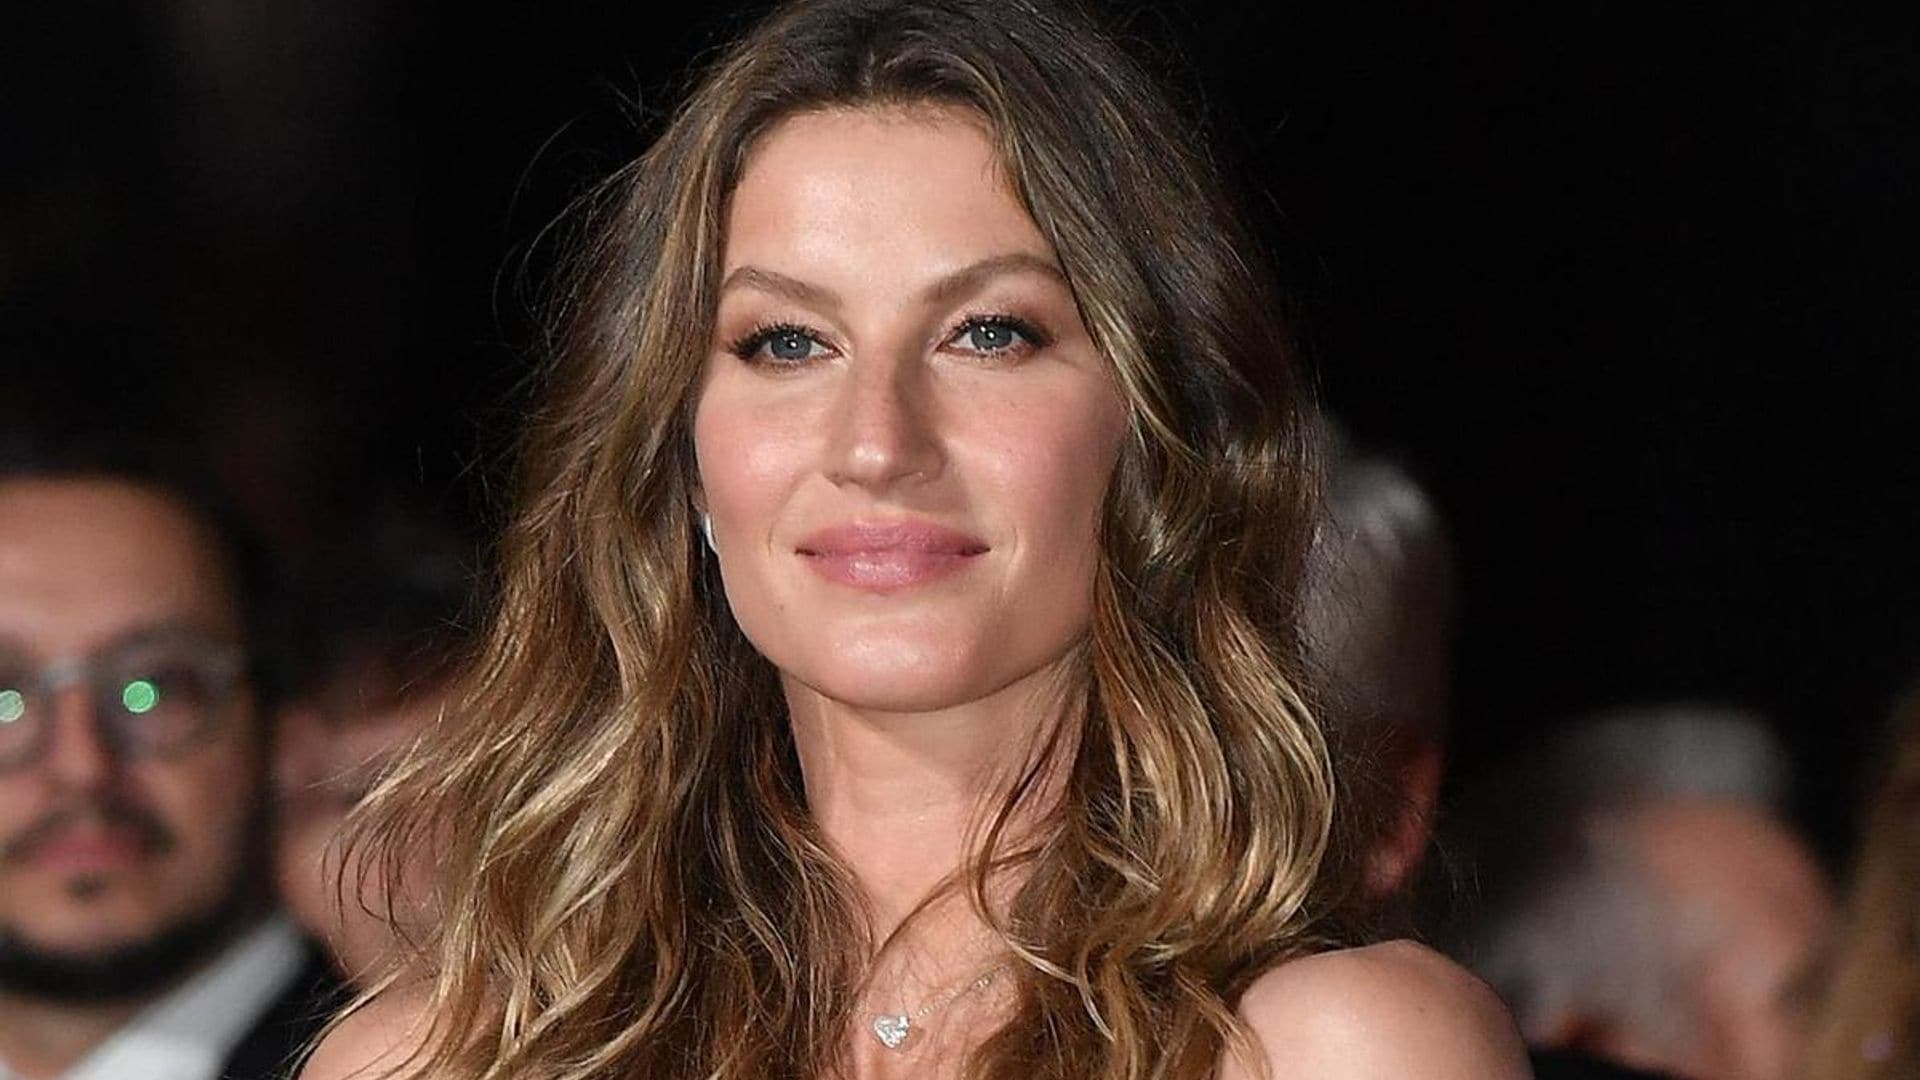 Gisele Bündchen on dating rumors with Jeffrey Soffer: ‘He’s Tom’s friend’